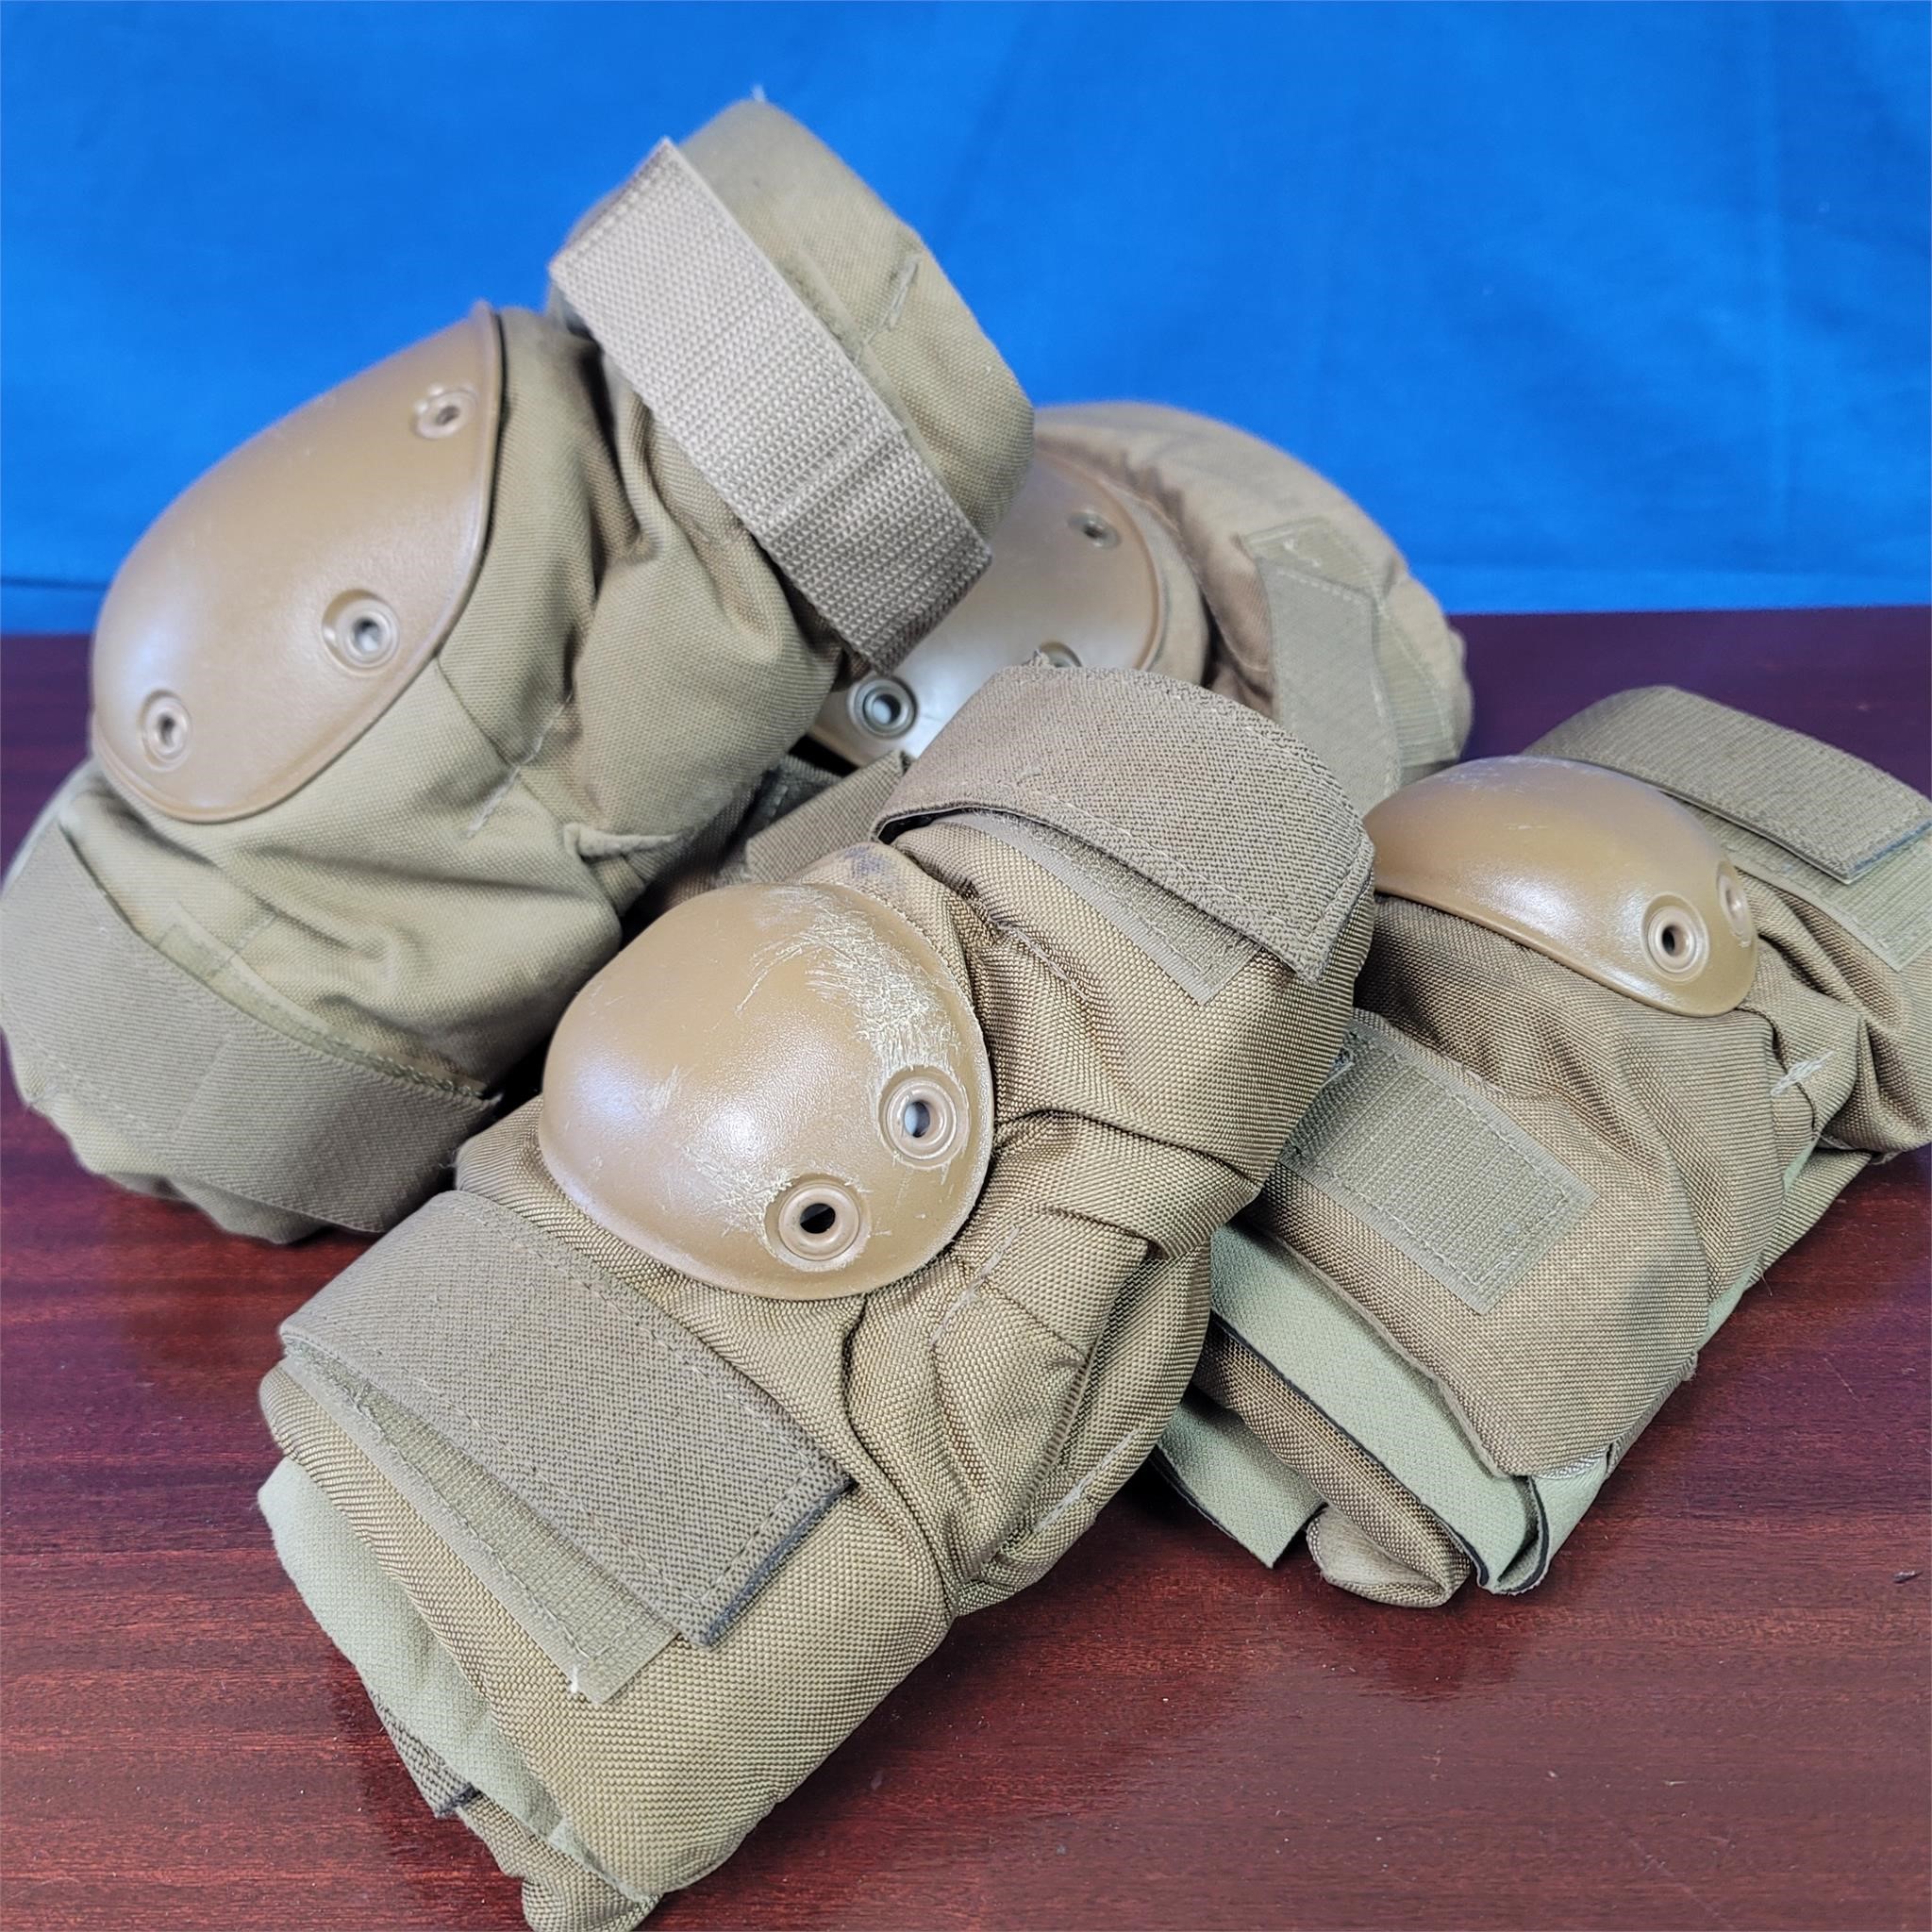 2 Sets of  Elbow Pads and 2 Sets of Knee Pads